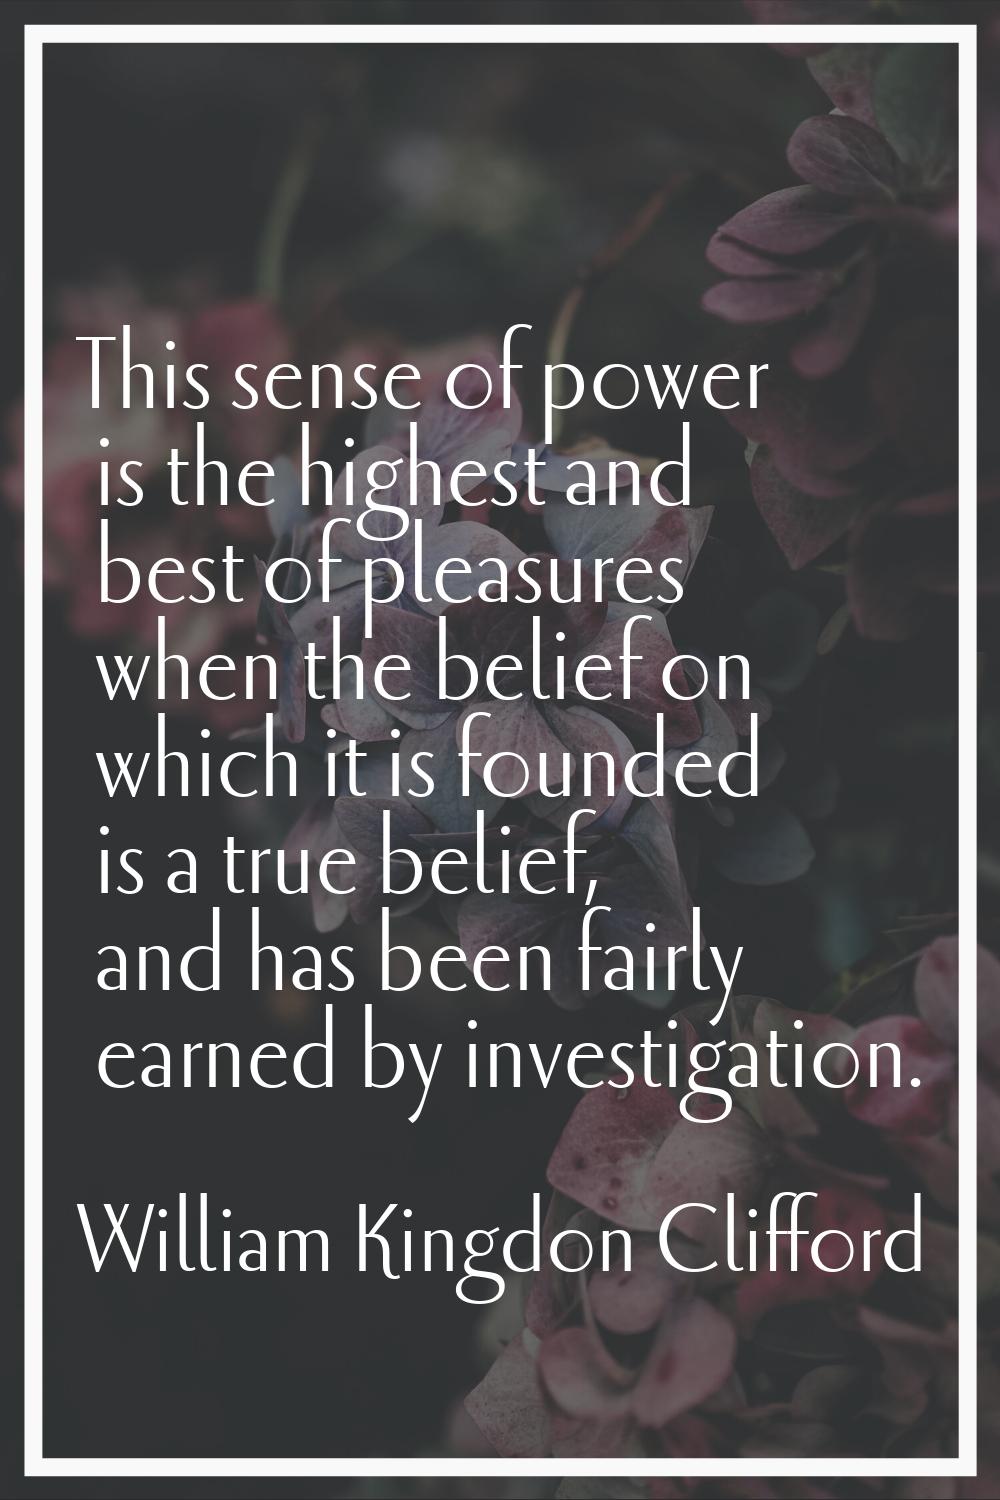 This sense of power is the highest and best of pleasures when the belief on which it is founded is 